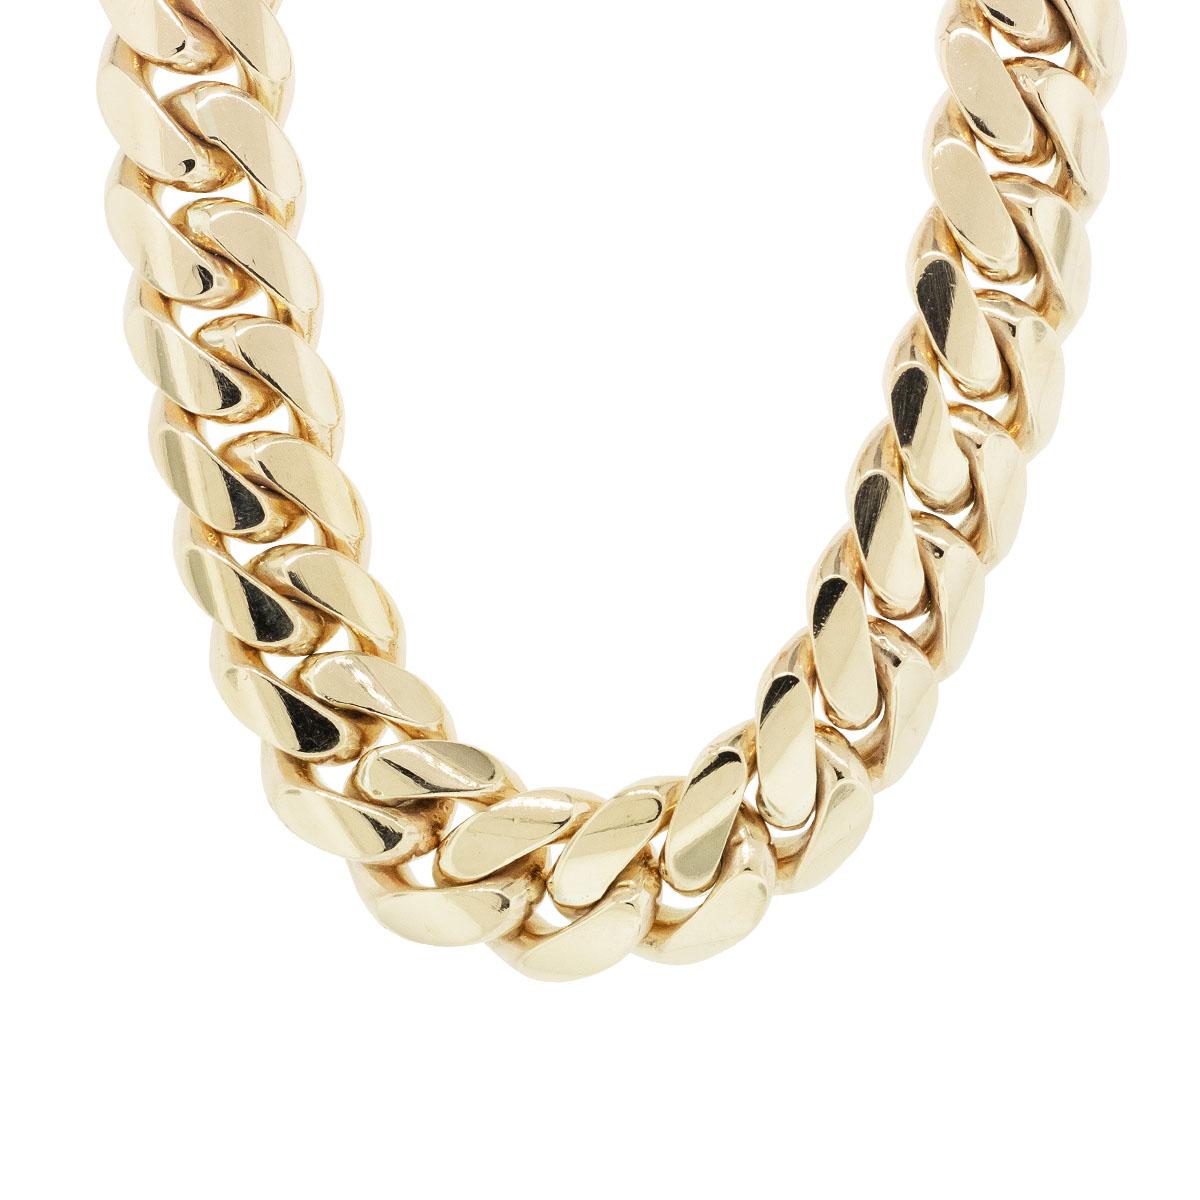 10k Yellow Gold 20mm Cuban Link 22 inch Chain Necklace

In the world of jewelry, there's nothing quite as iconic and timeless as a gold chain necklace. These pieces have adorned the necks of men and women for generations, and they continue to be a